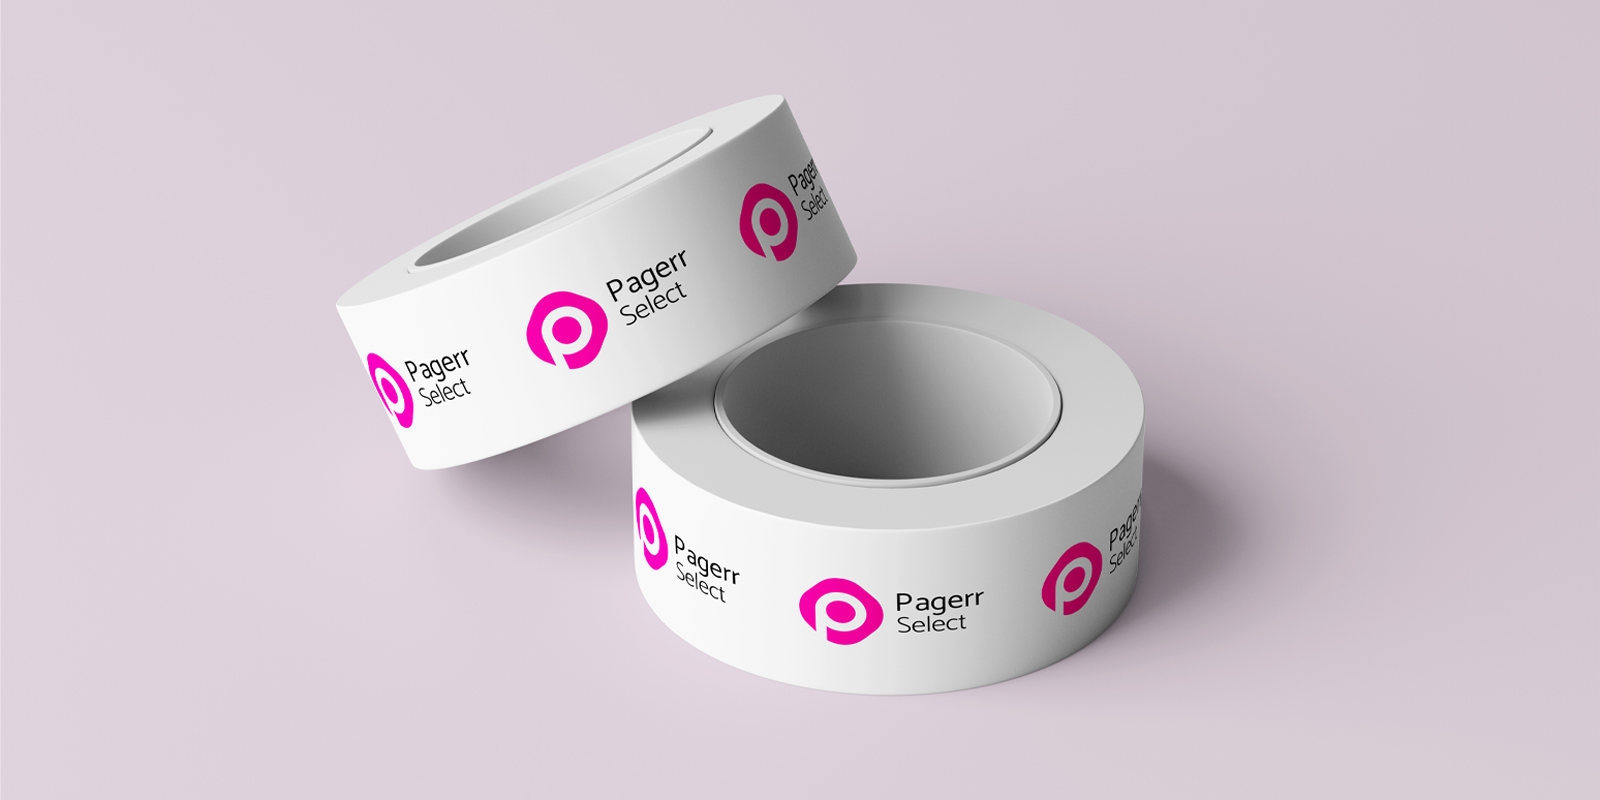 Logo tapes in Launceston - Print with Pagerr